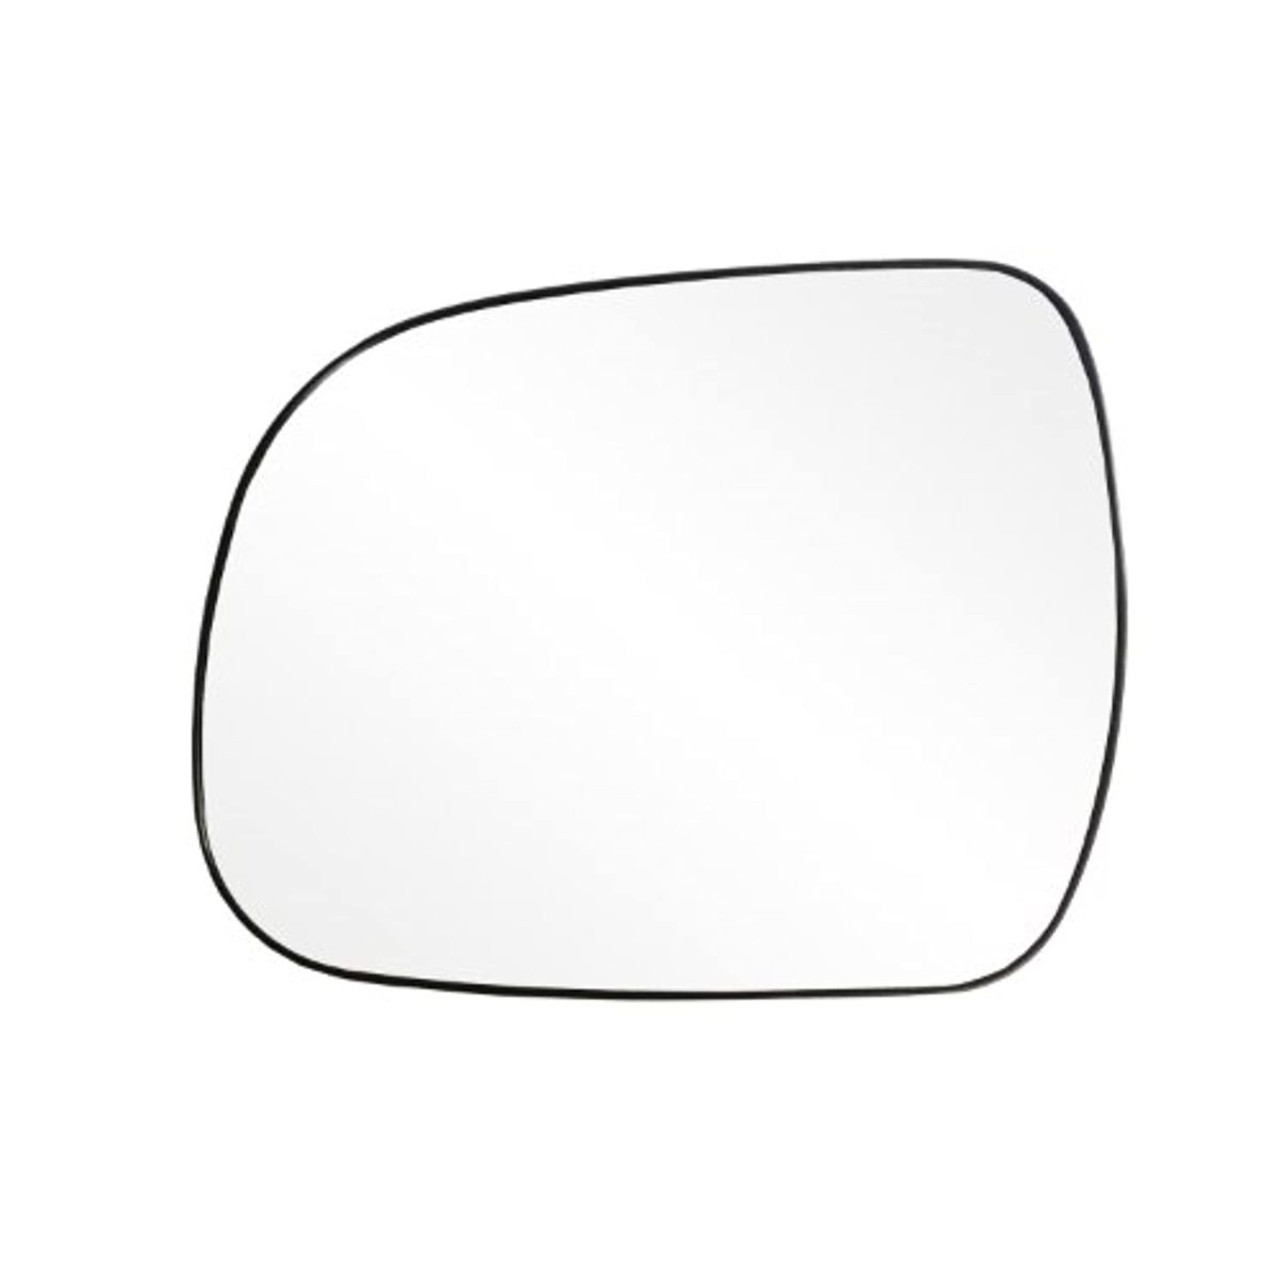 Fit System - 88224 Driver Side Non-Heated Mirror Glass w/Backing Plate, Toyota Highlander US Built, Tacoma, Tacoma, 5 15/16" x 7 1/2" x 8 3/8"